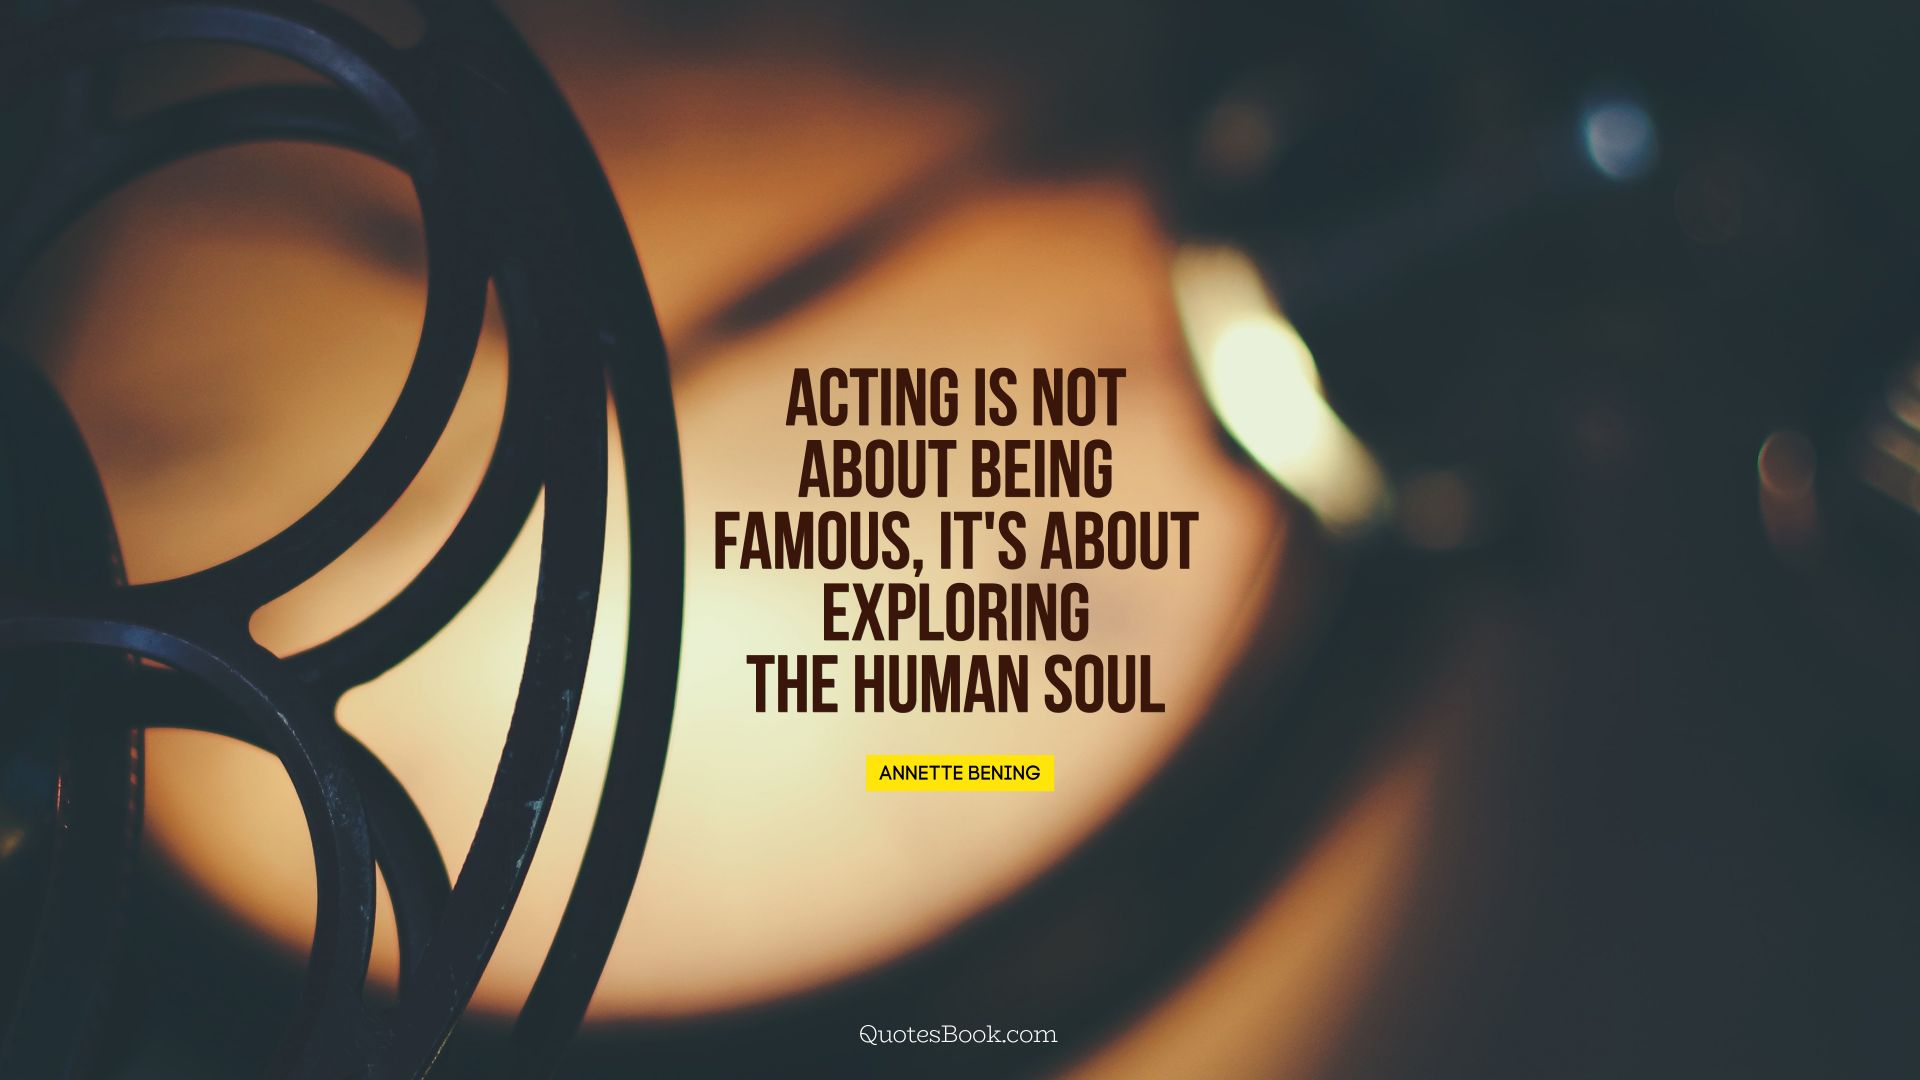 Acting is not about being famous, it's about exploring the human soul. - Quote by Annette Bening